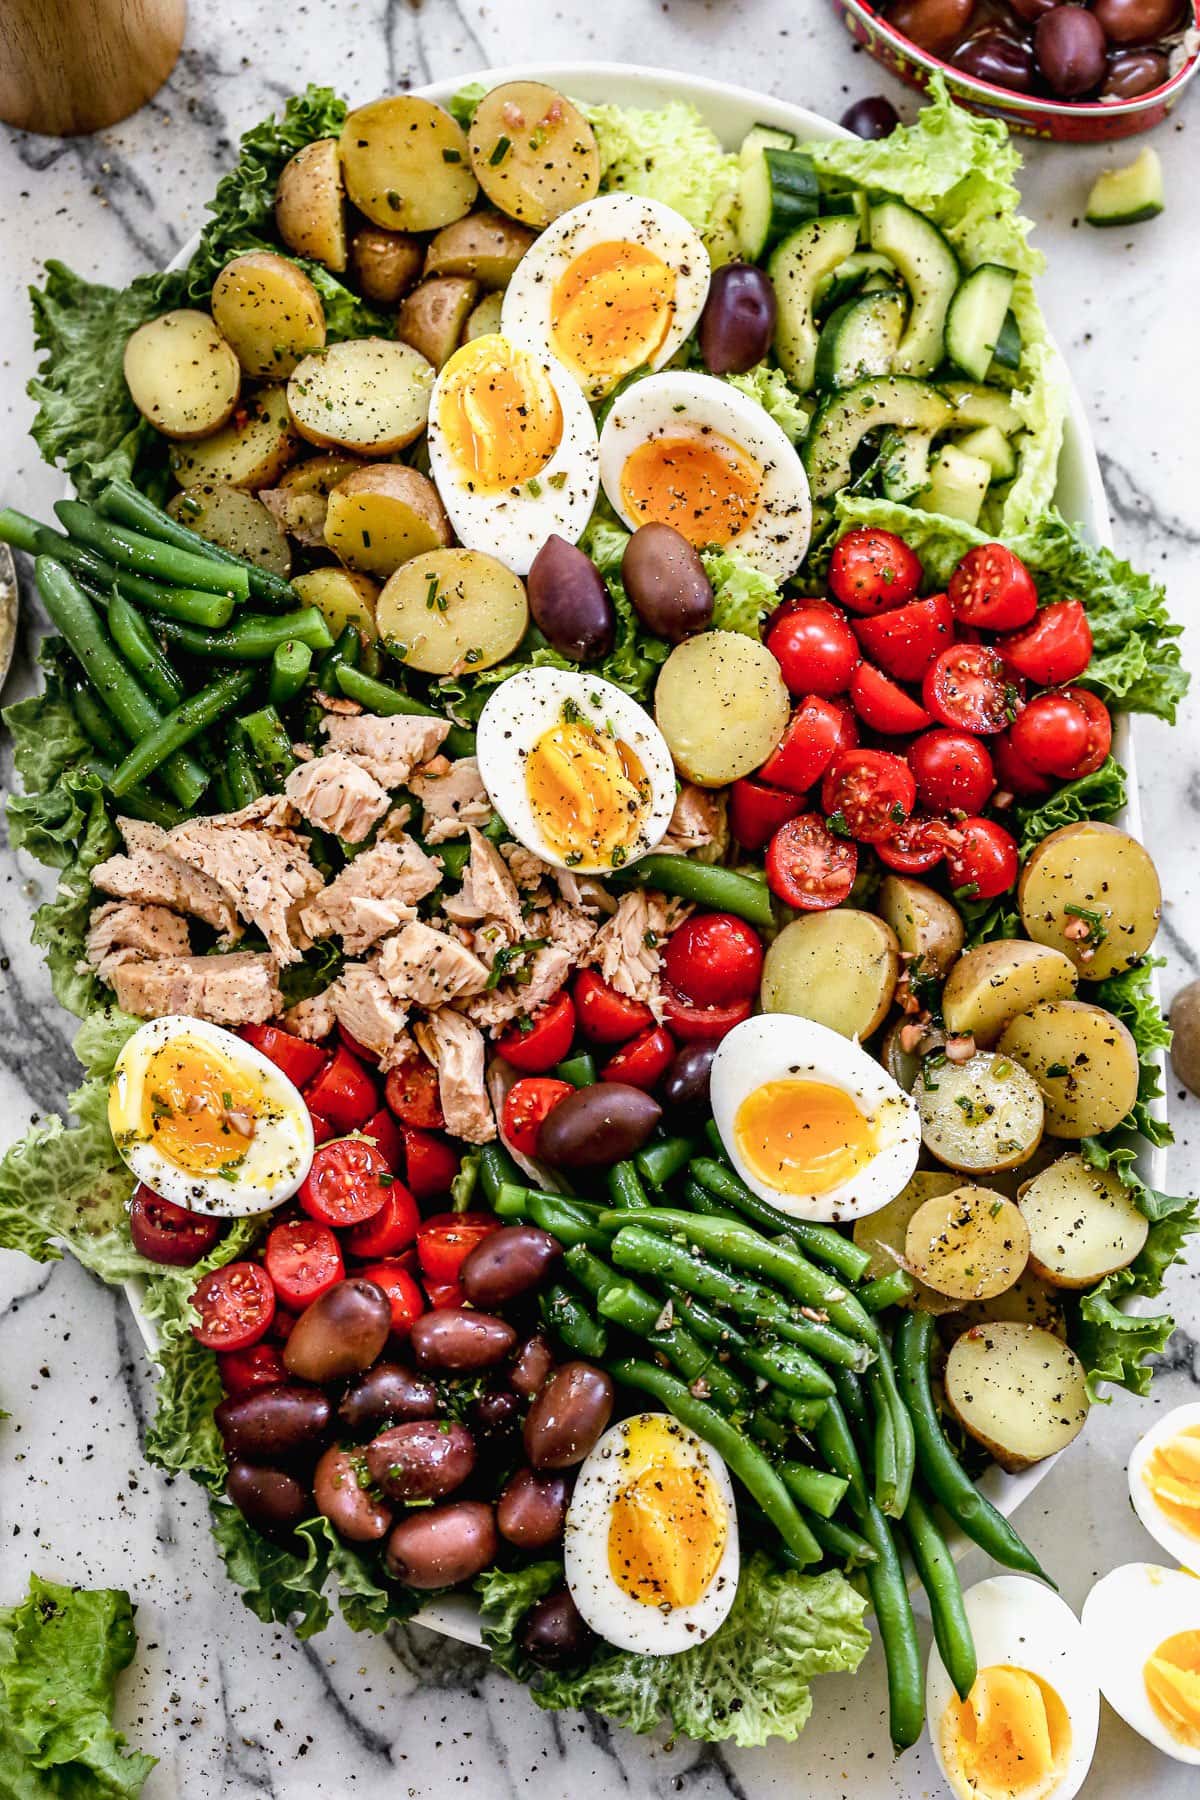 A big bowl of nicoise salad with capers